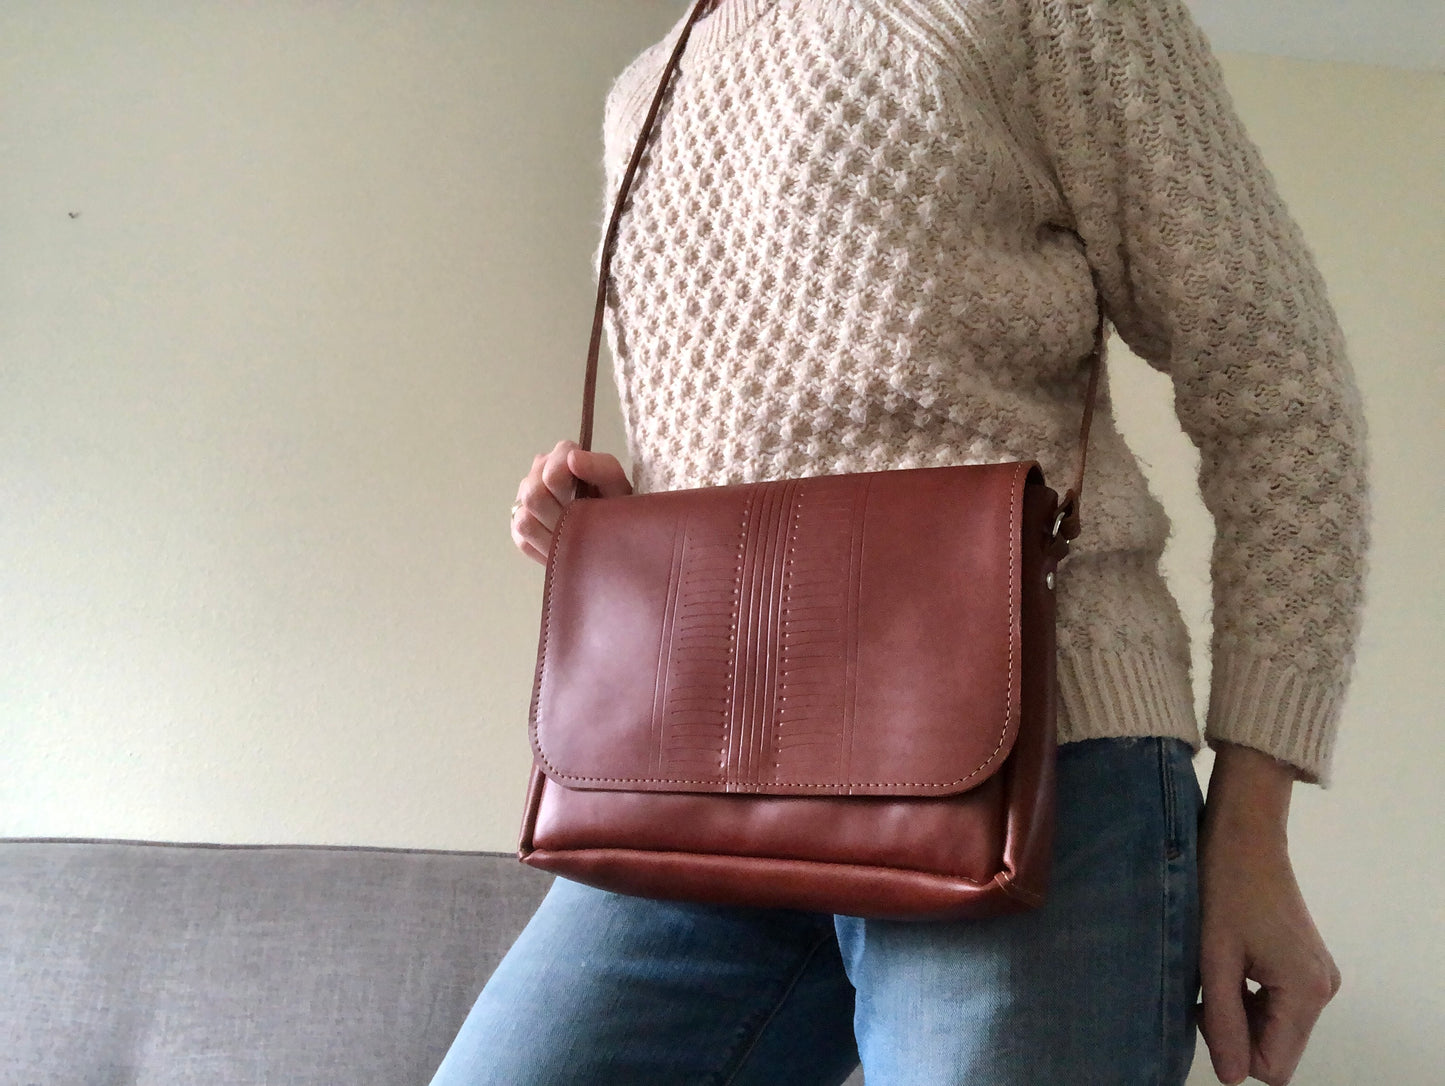 Woman wears brown leather bag with center pattern detail.